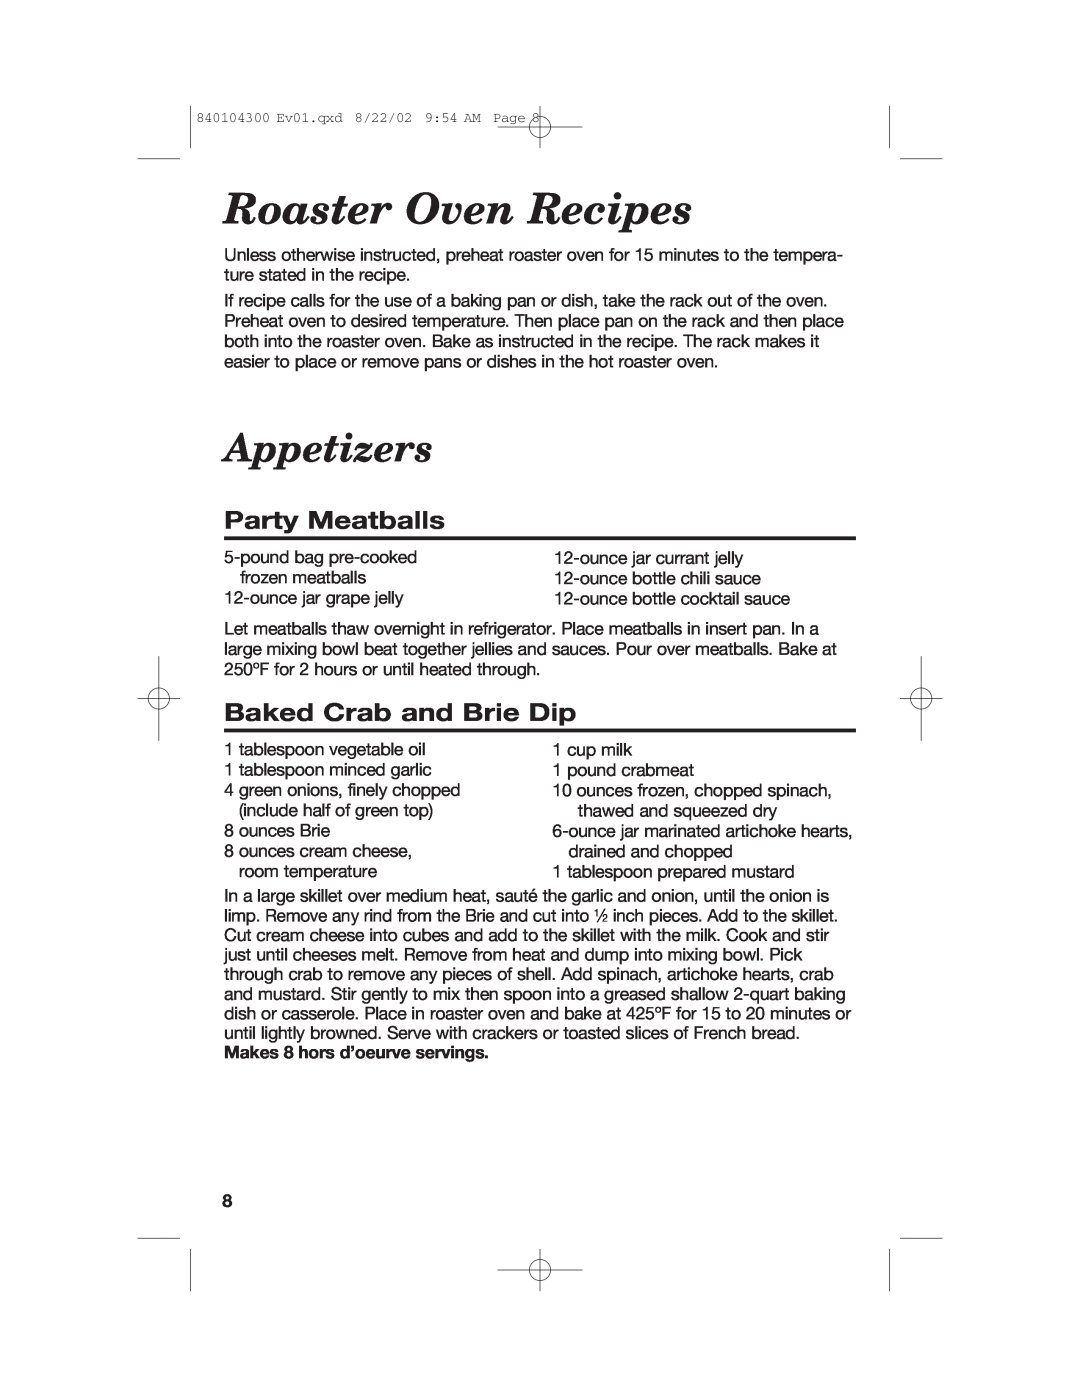 Hamilton Beach 32180C manual Roaster Oven Recipes, Appetizers, Party Meatballs, Baked Crab and Brie Dip 